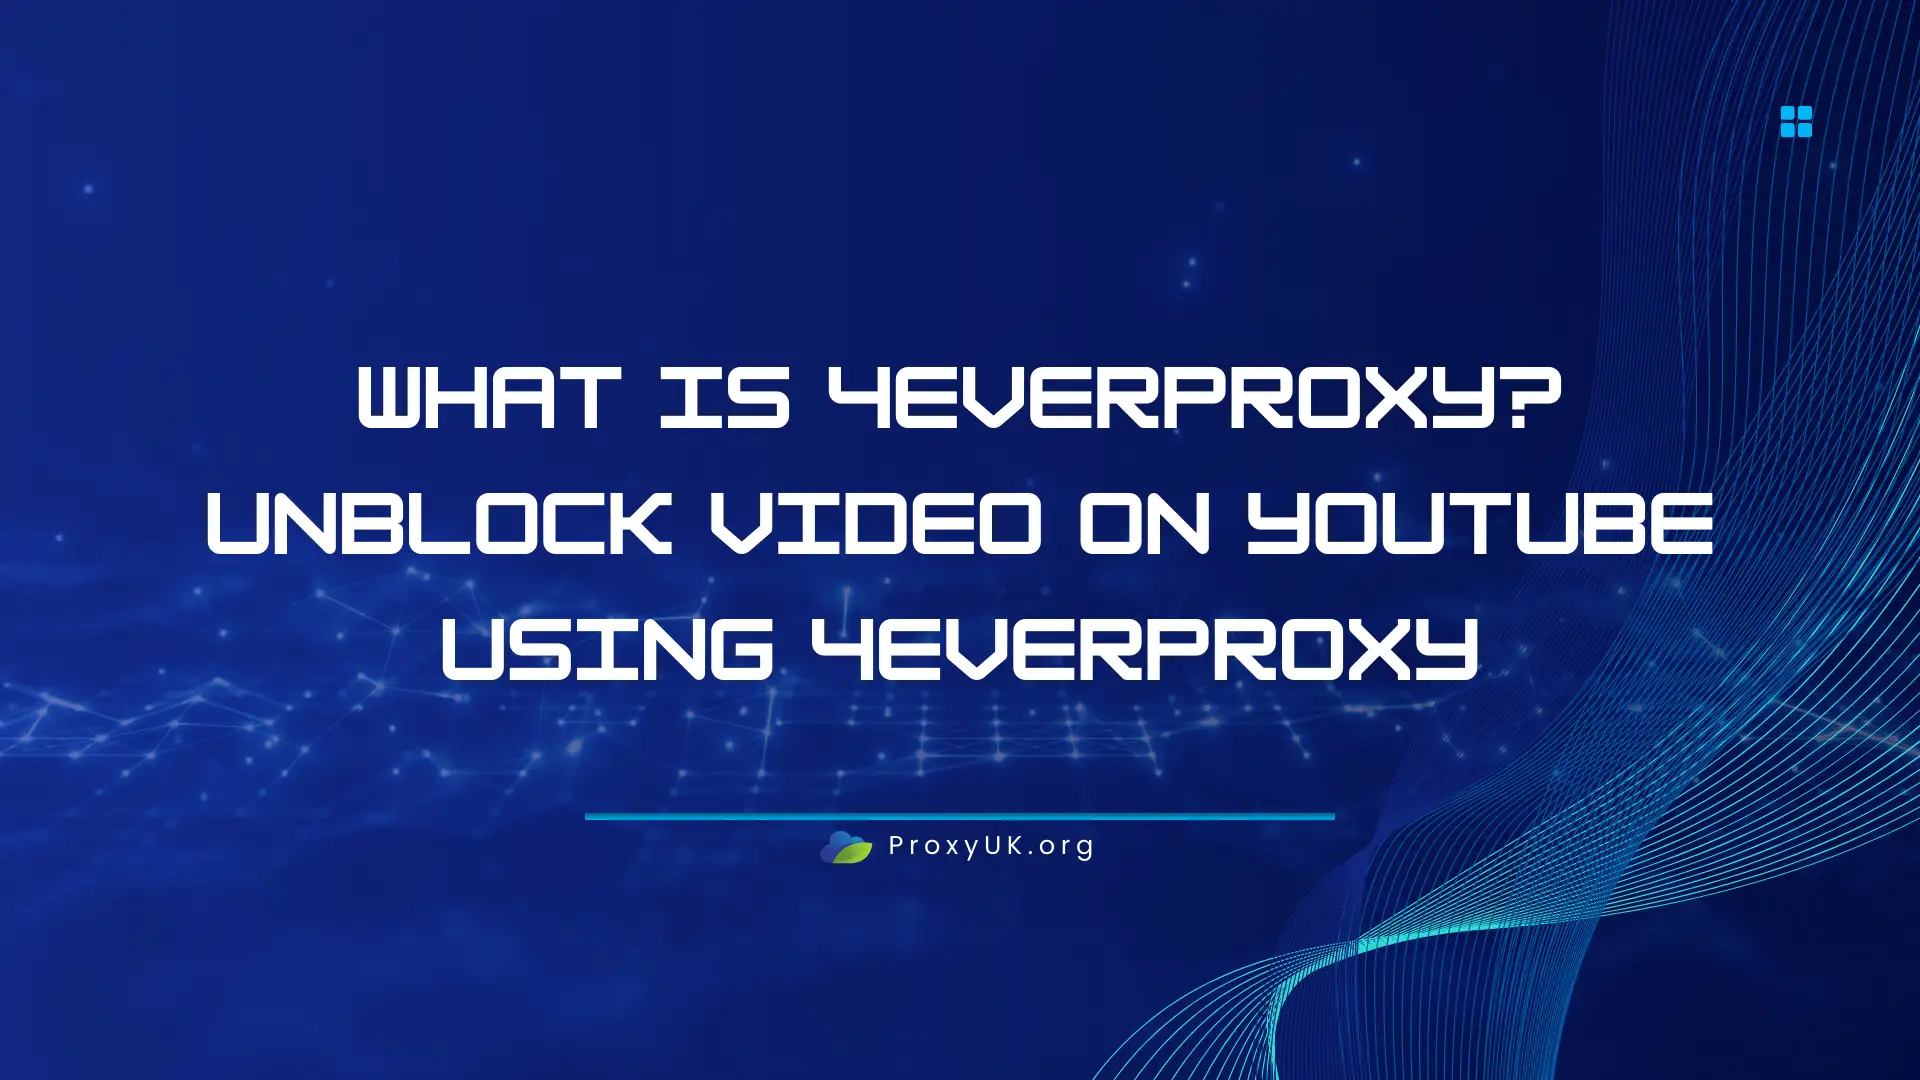 What is 4everproxy?